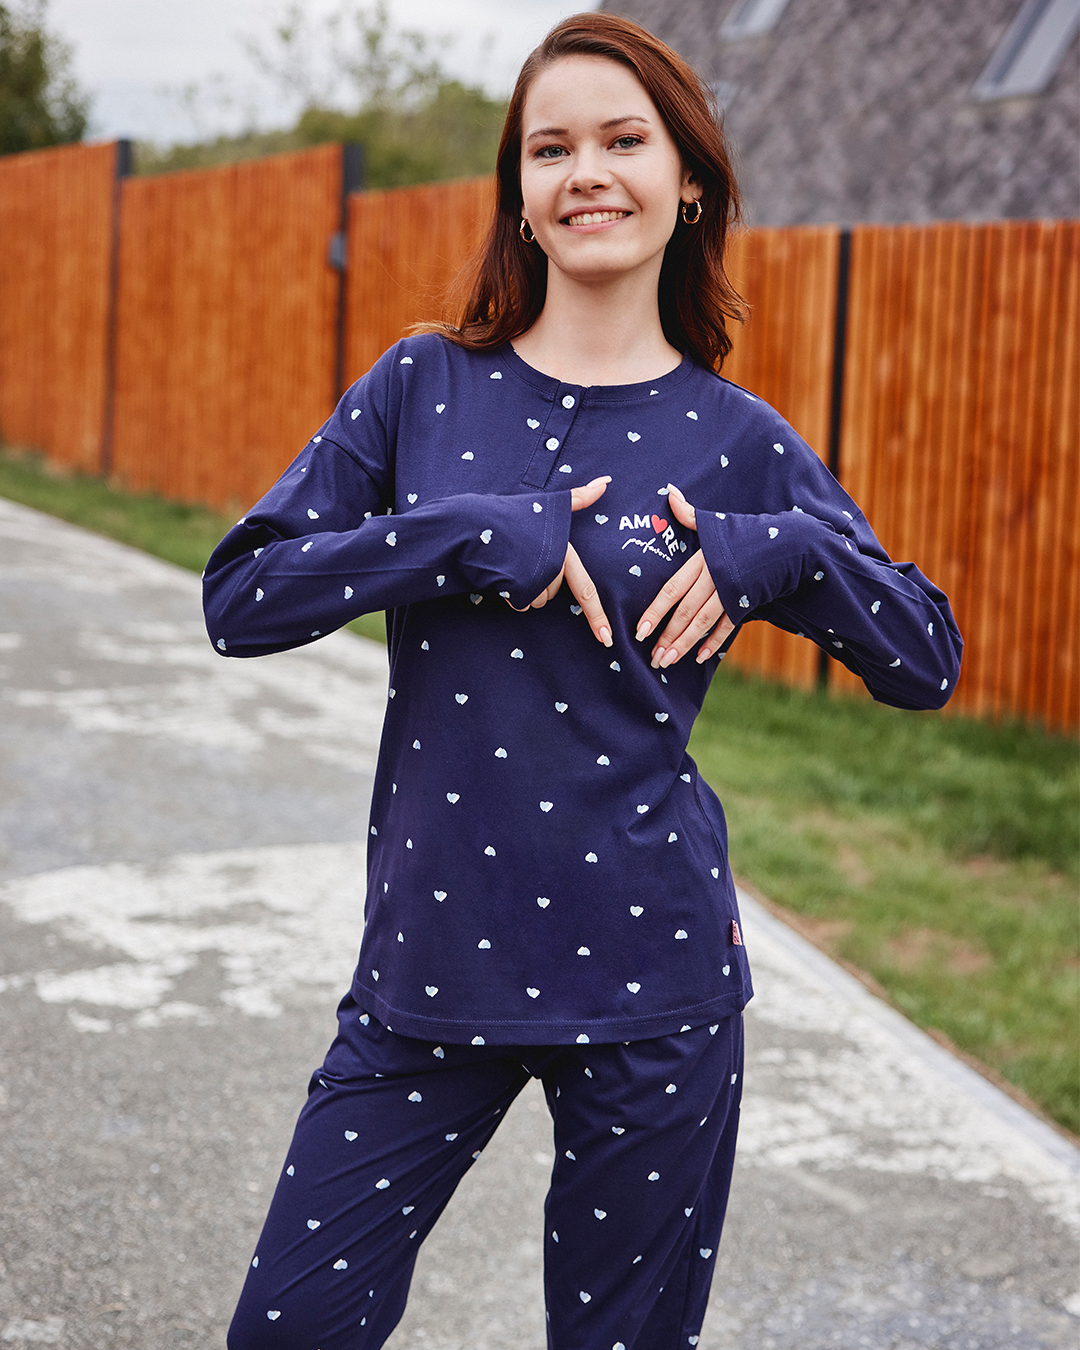 AMORE Women's long sleeve pajama with buttons Thermal Fabric